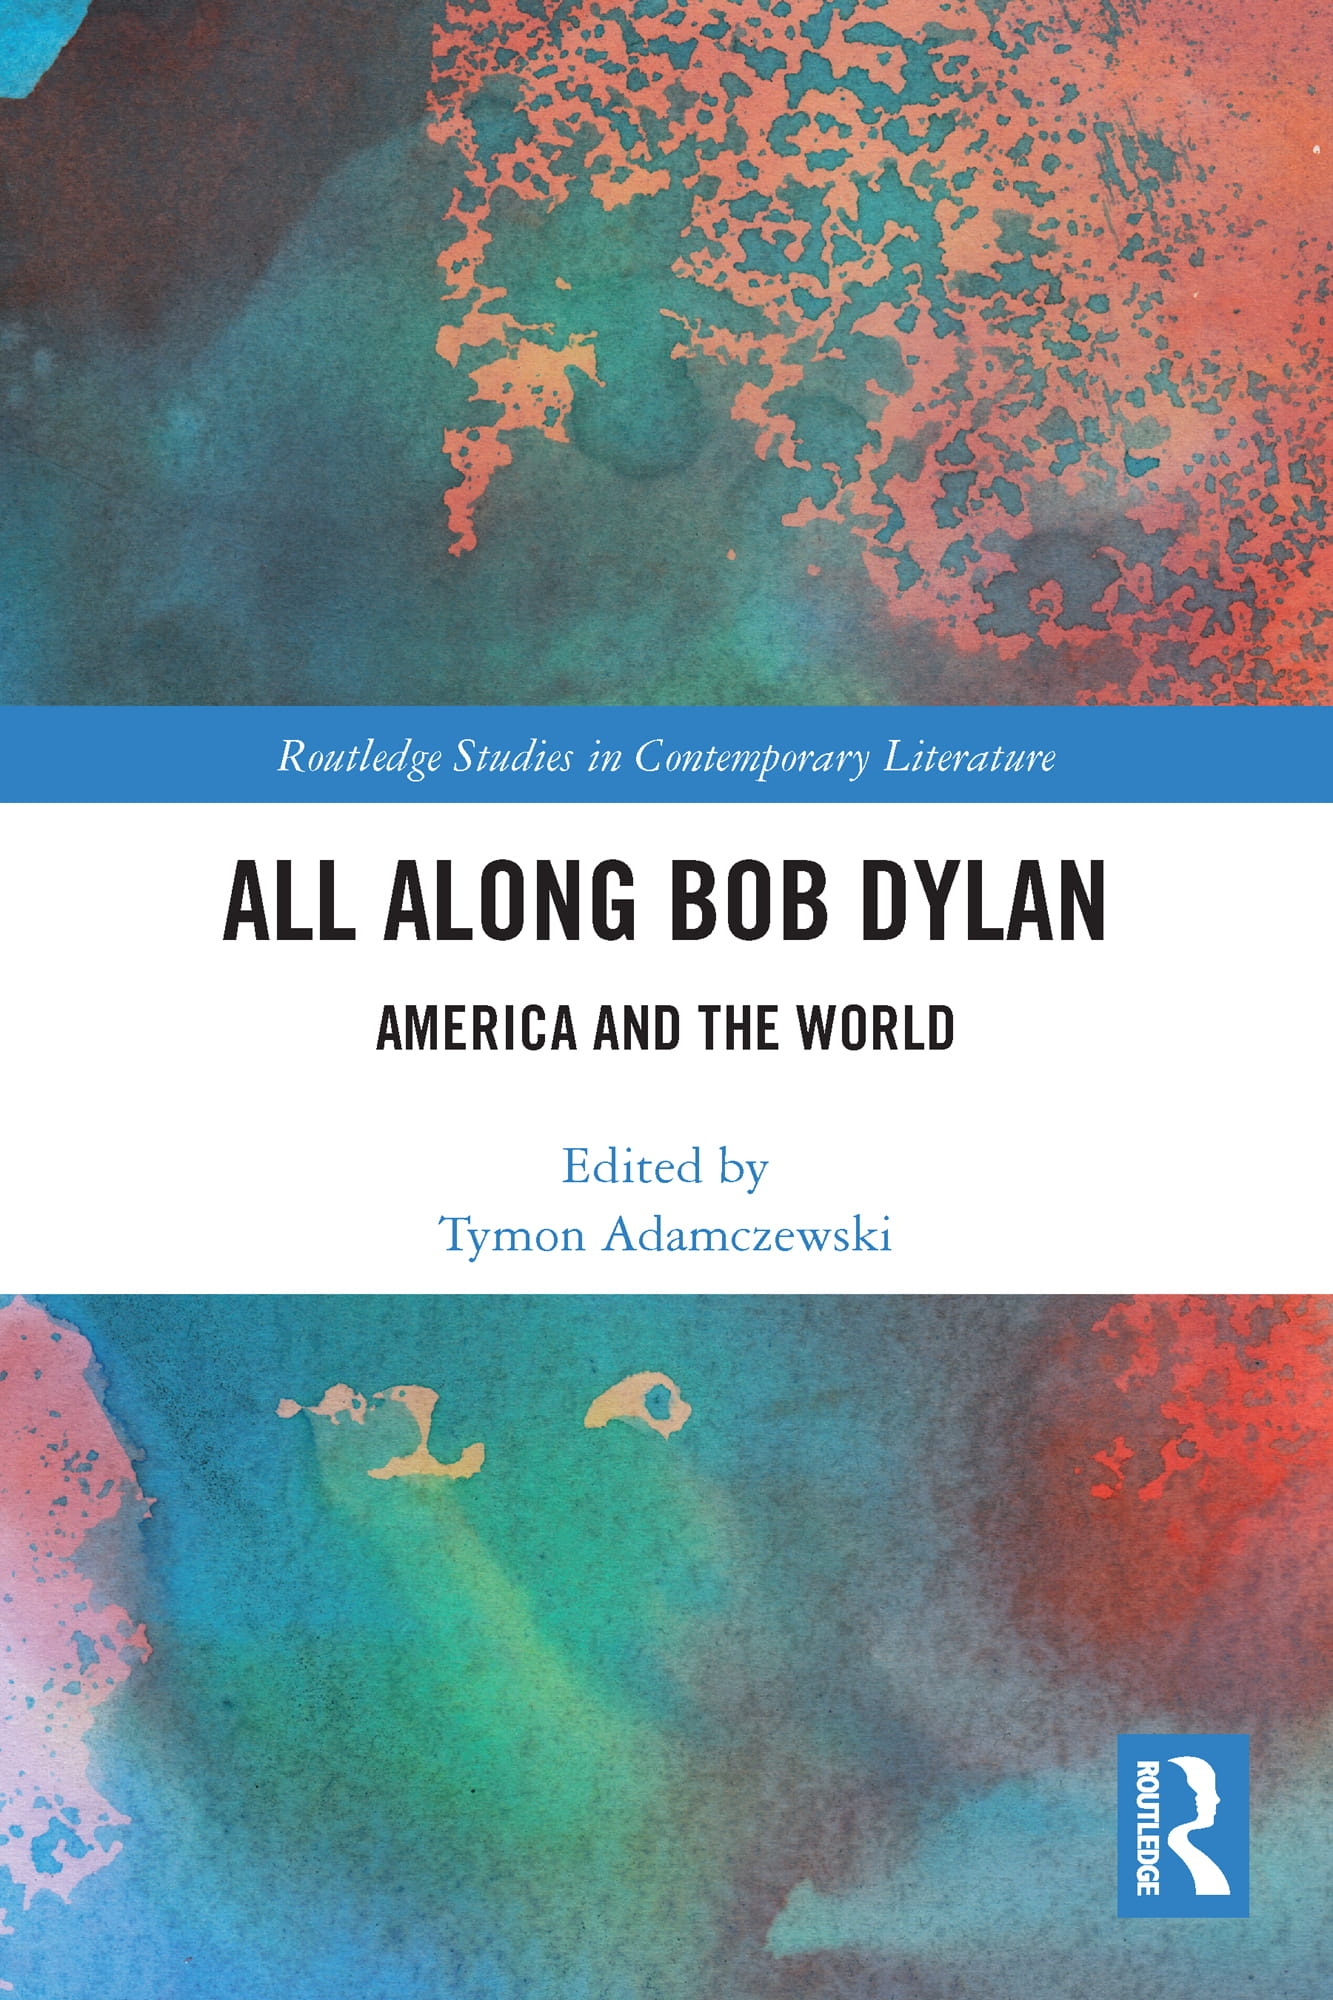 All Along Bob Dylan: America and the World